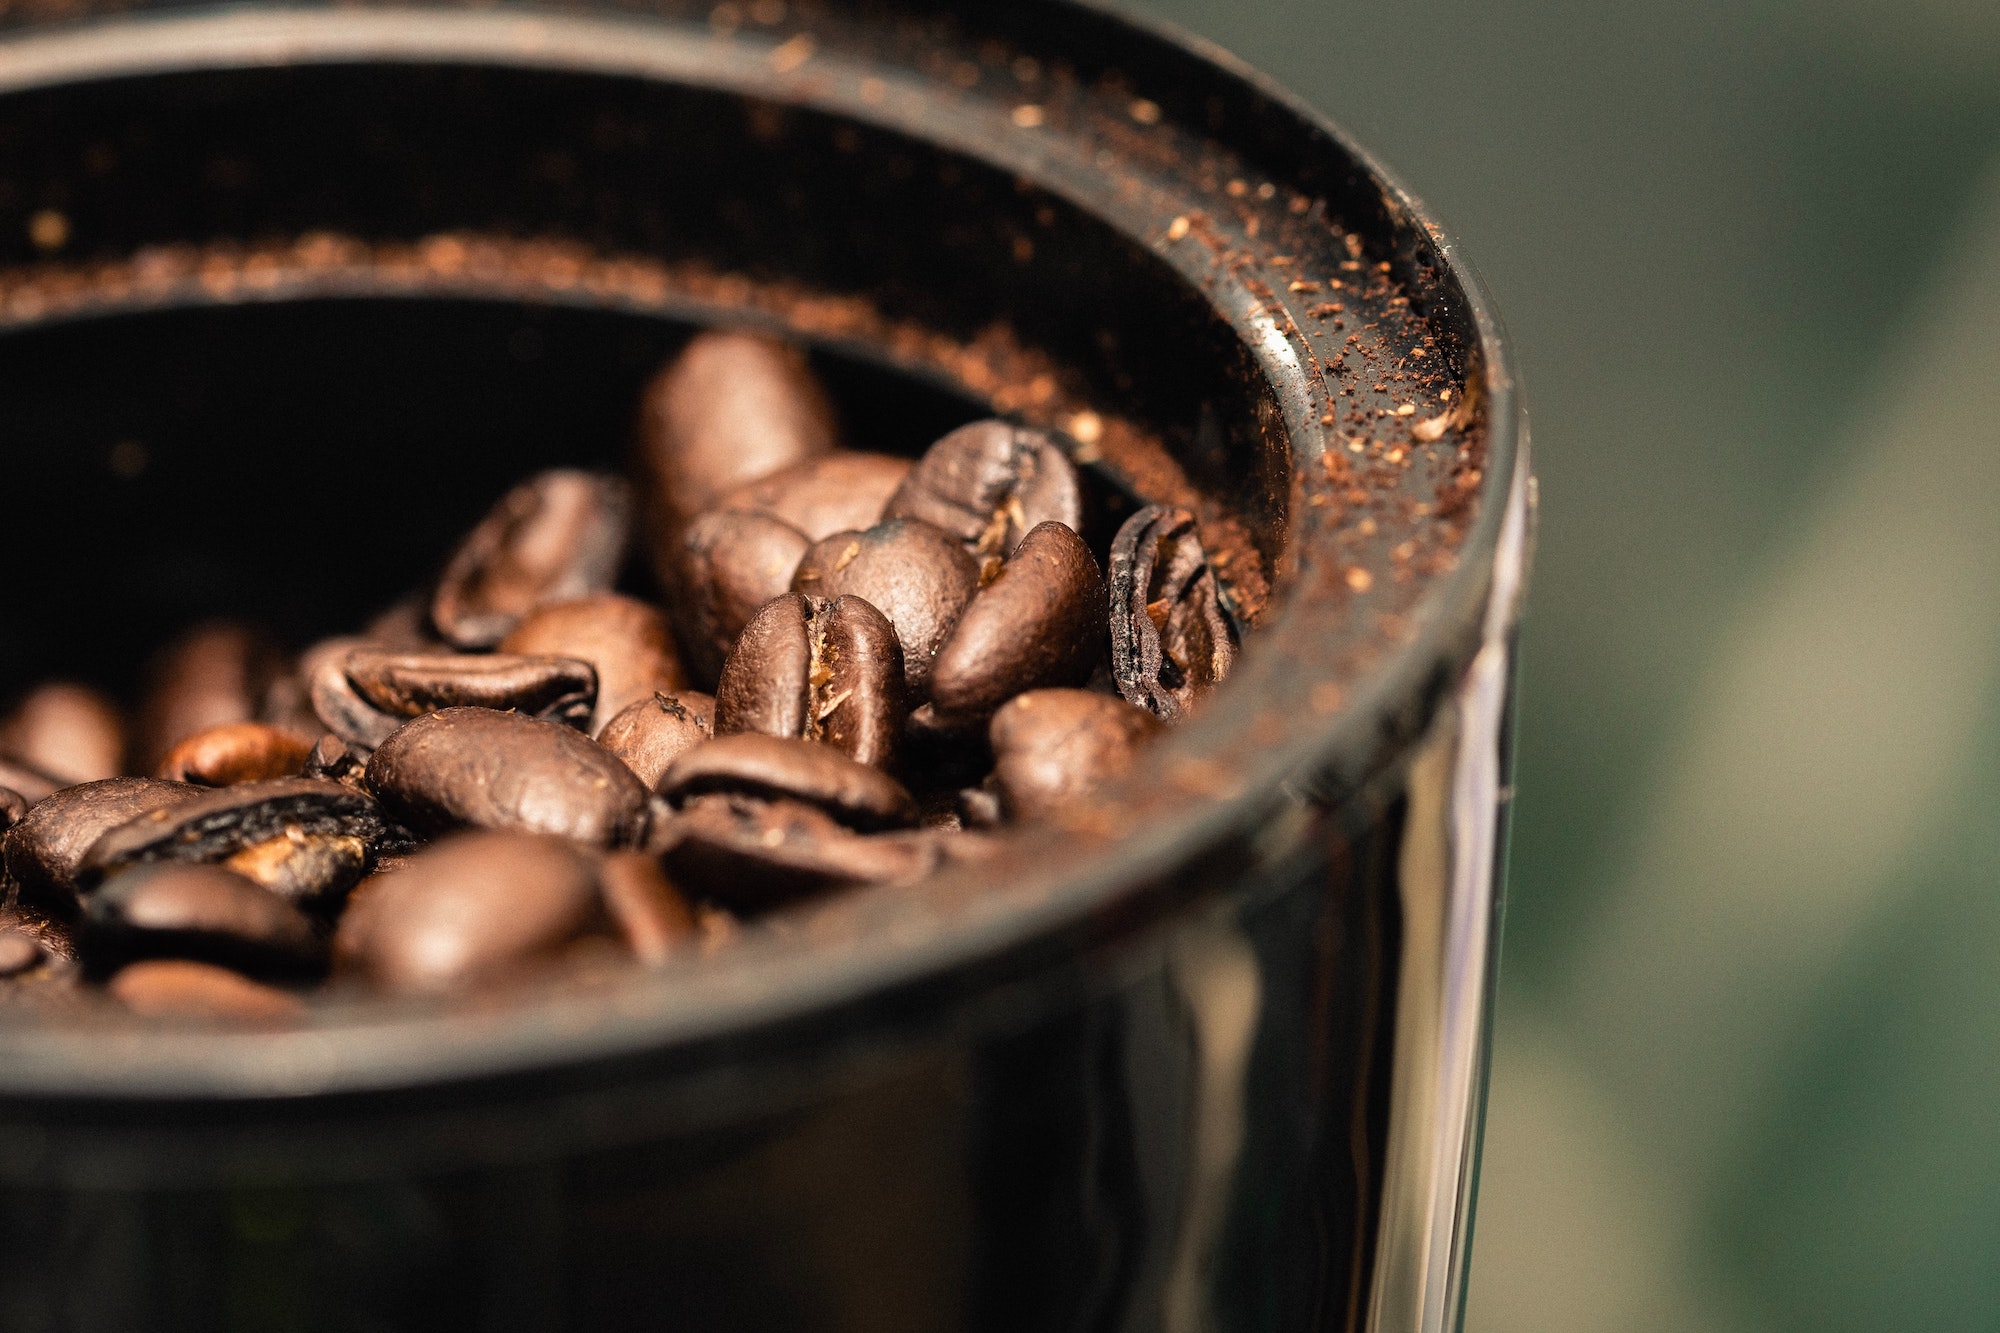 How To Clean A Coffee Grinder